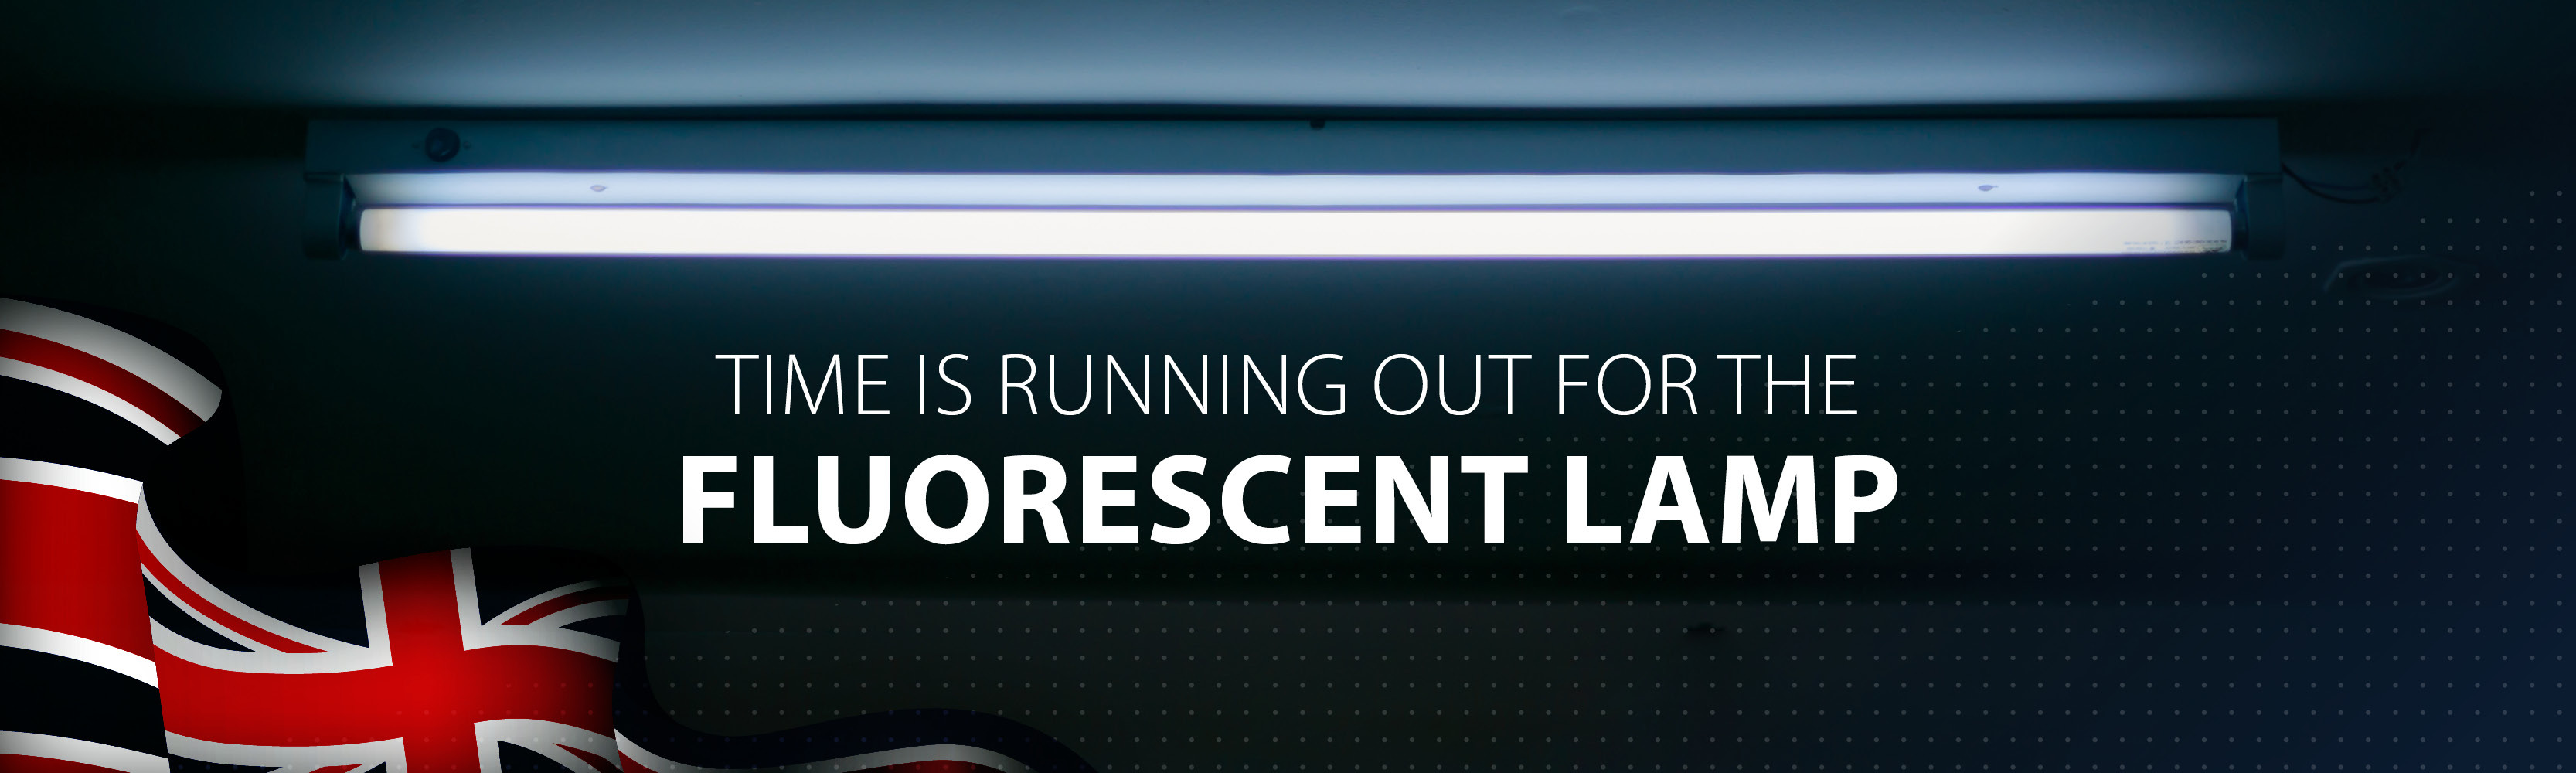 Time is running out for the fluorescent lamp in the UK